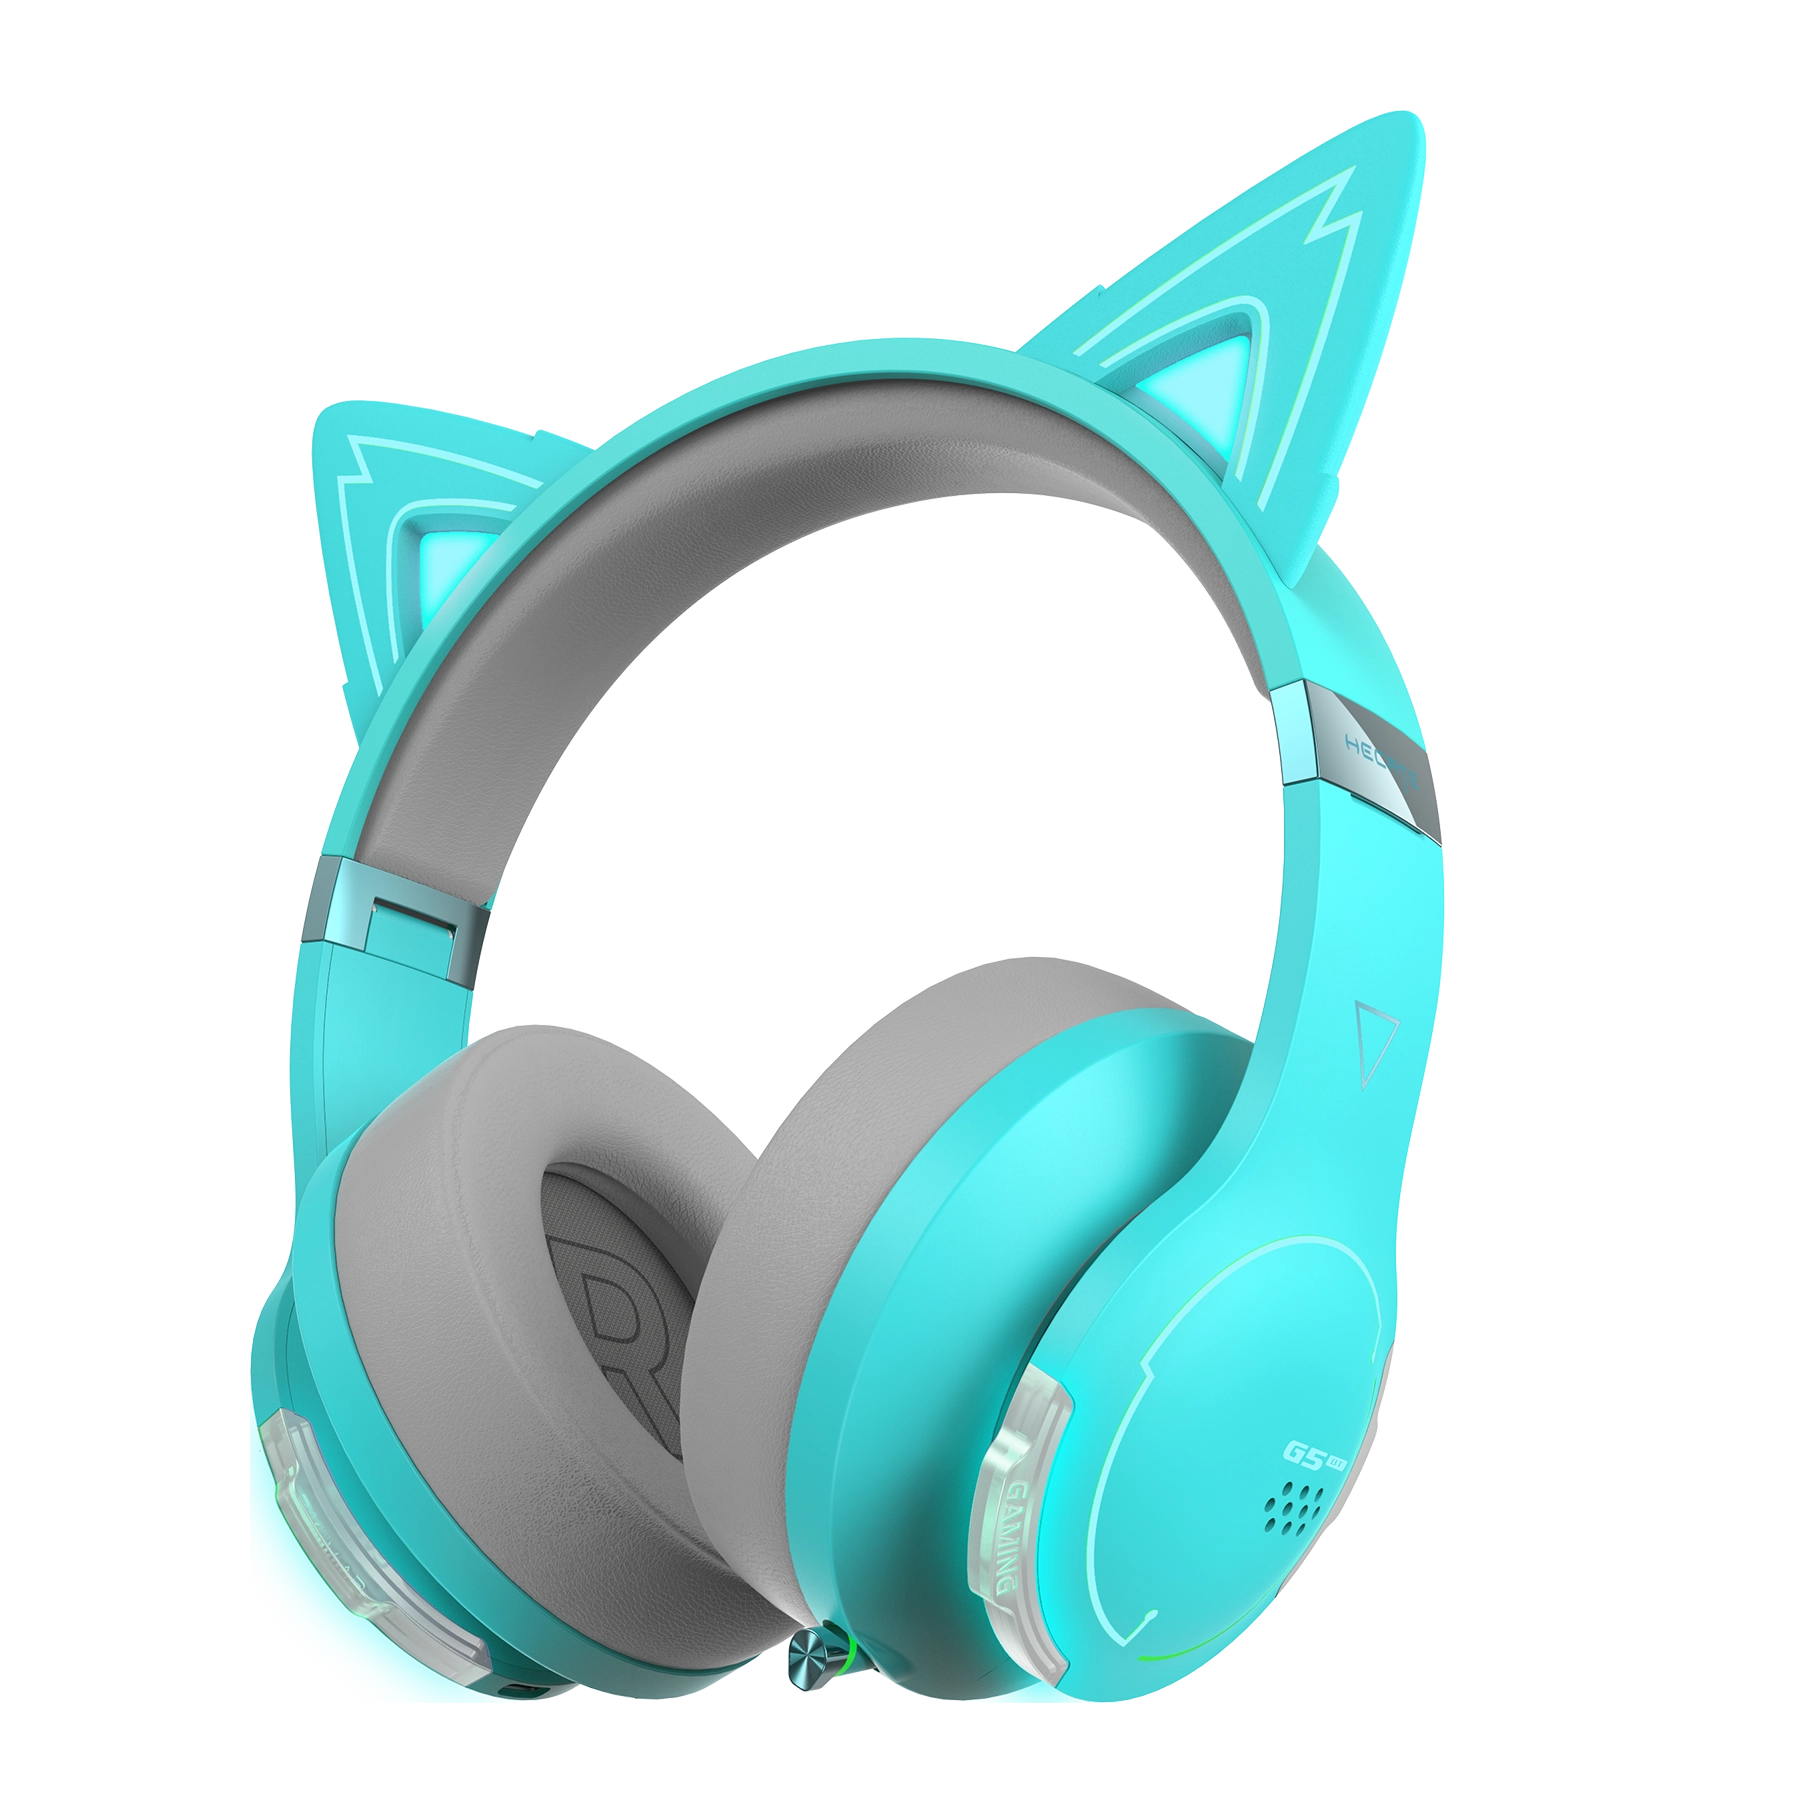 G5BT CAT Headphone product pictures turquoise_